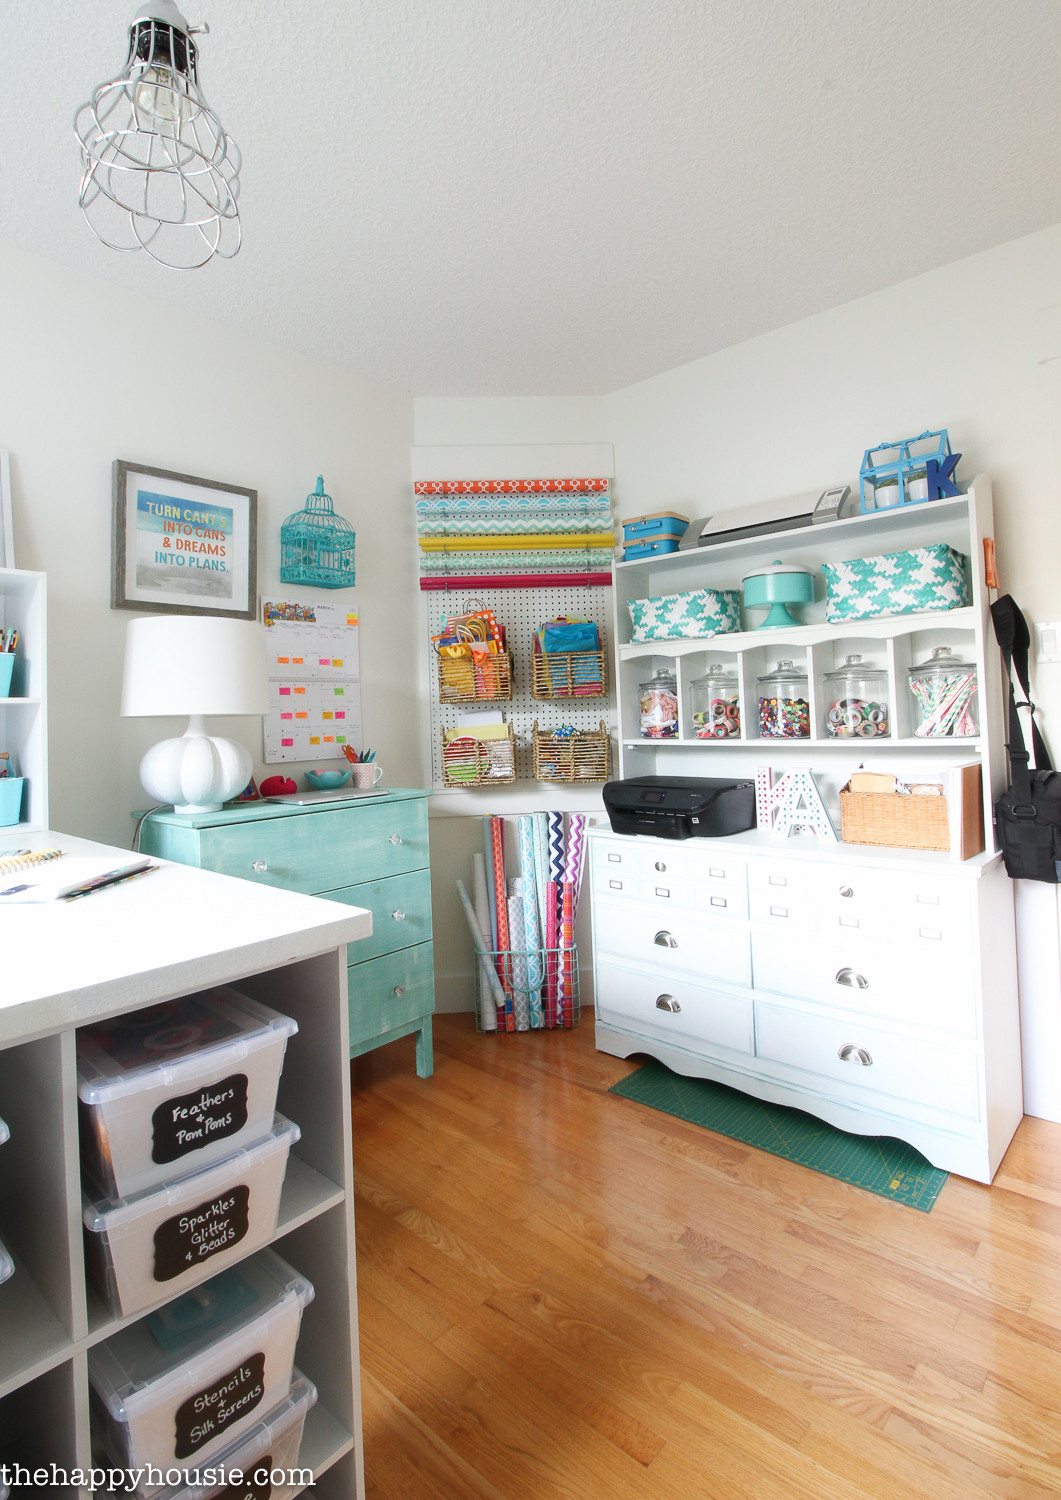 Organization Ideas For Craft Room
 How to Organize a Craft Room Work Space